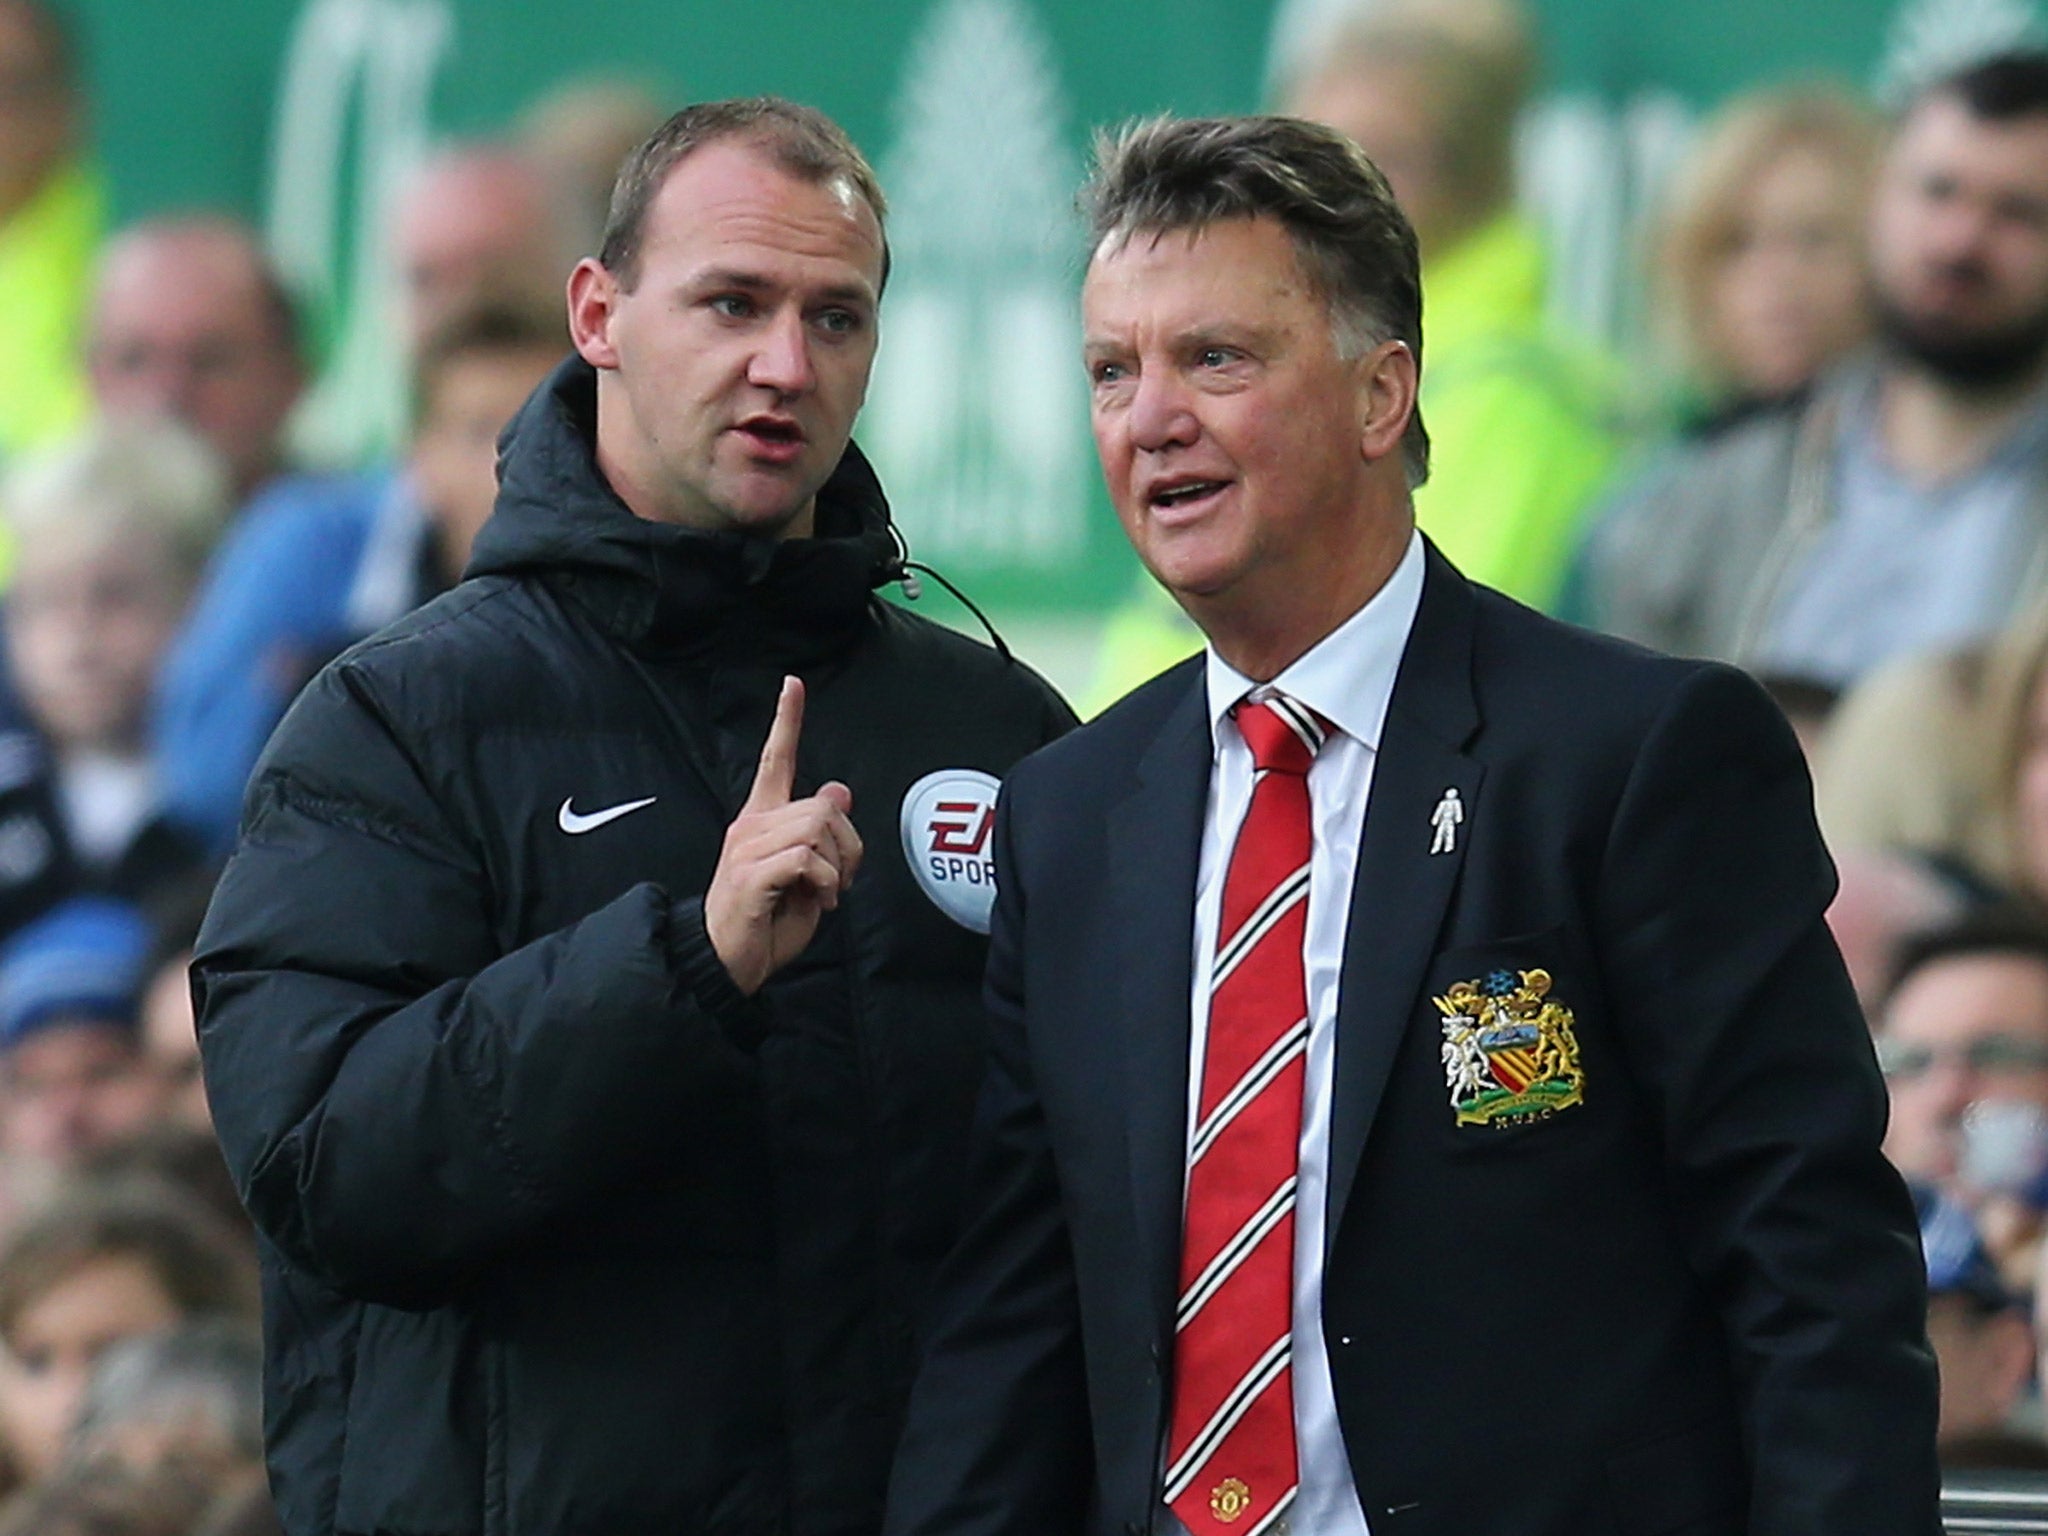 Louis van Gaal speaks with the fourth official during the match against Everton